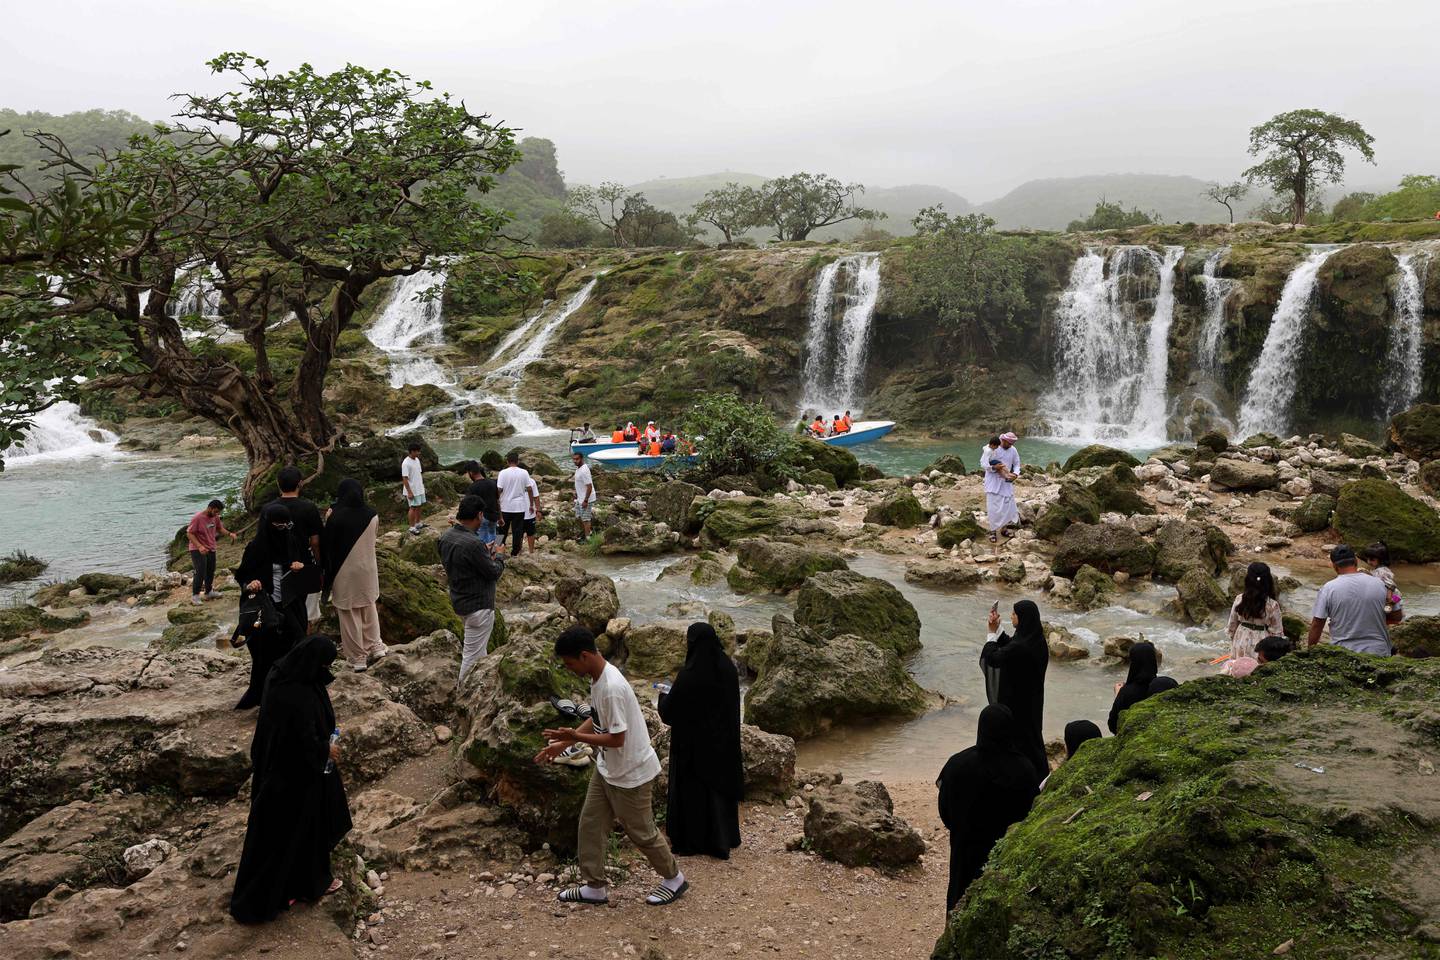 Locals and tourists tour the Wadi Darbat (Darbat Valley) near Salalah, in the southern Omani province of Dhofar.  AFP